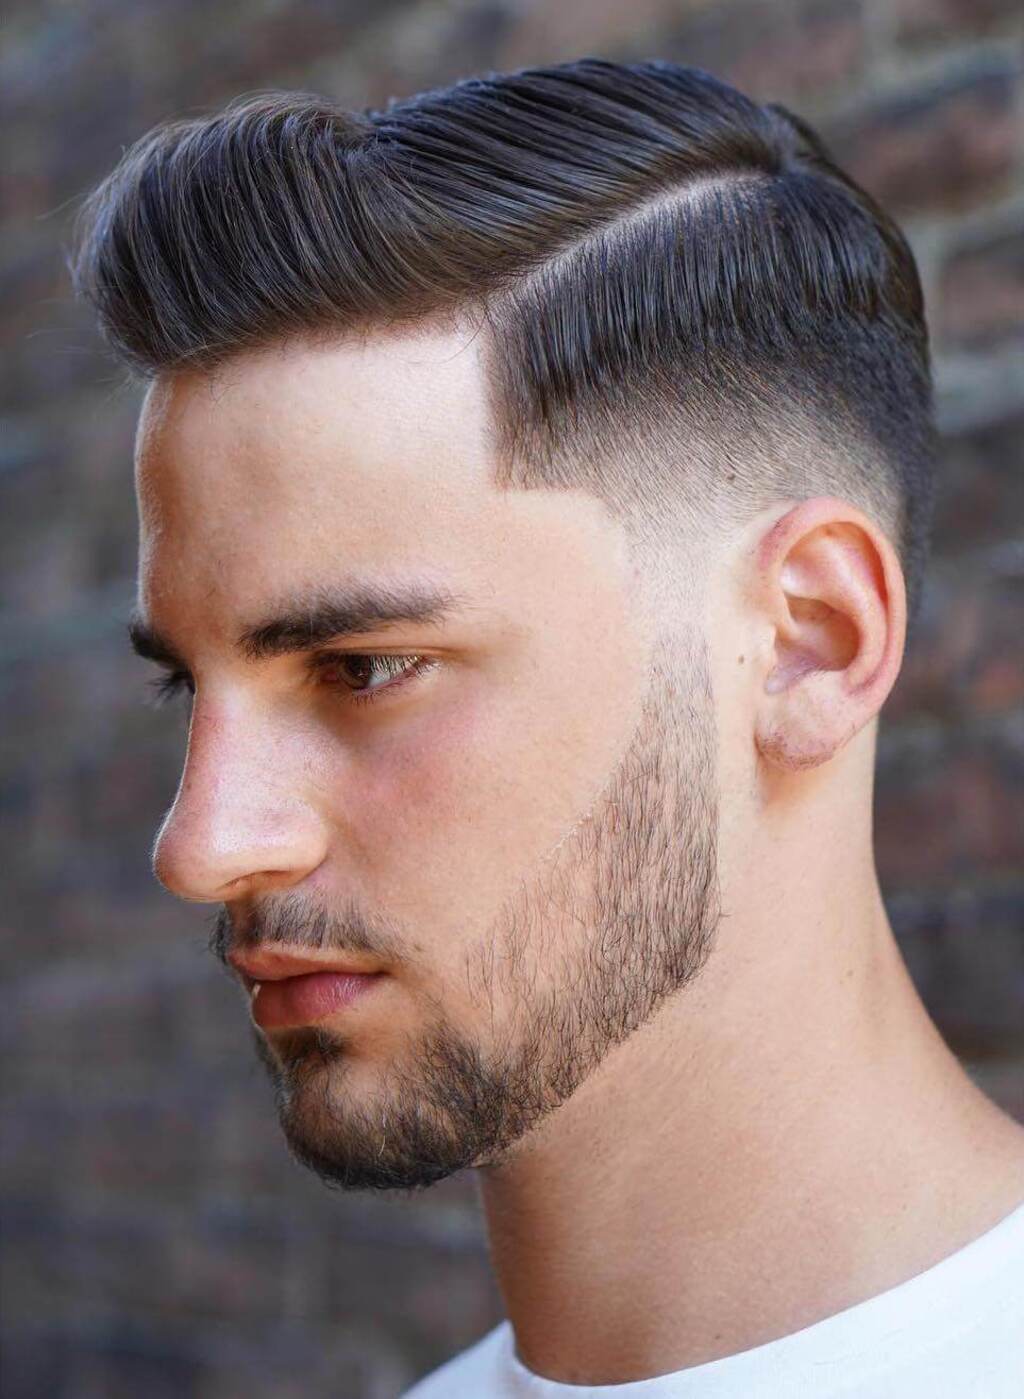 The Military Haircut Fade For Men